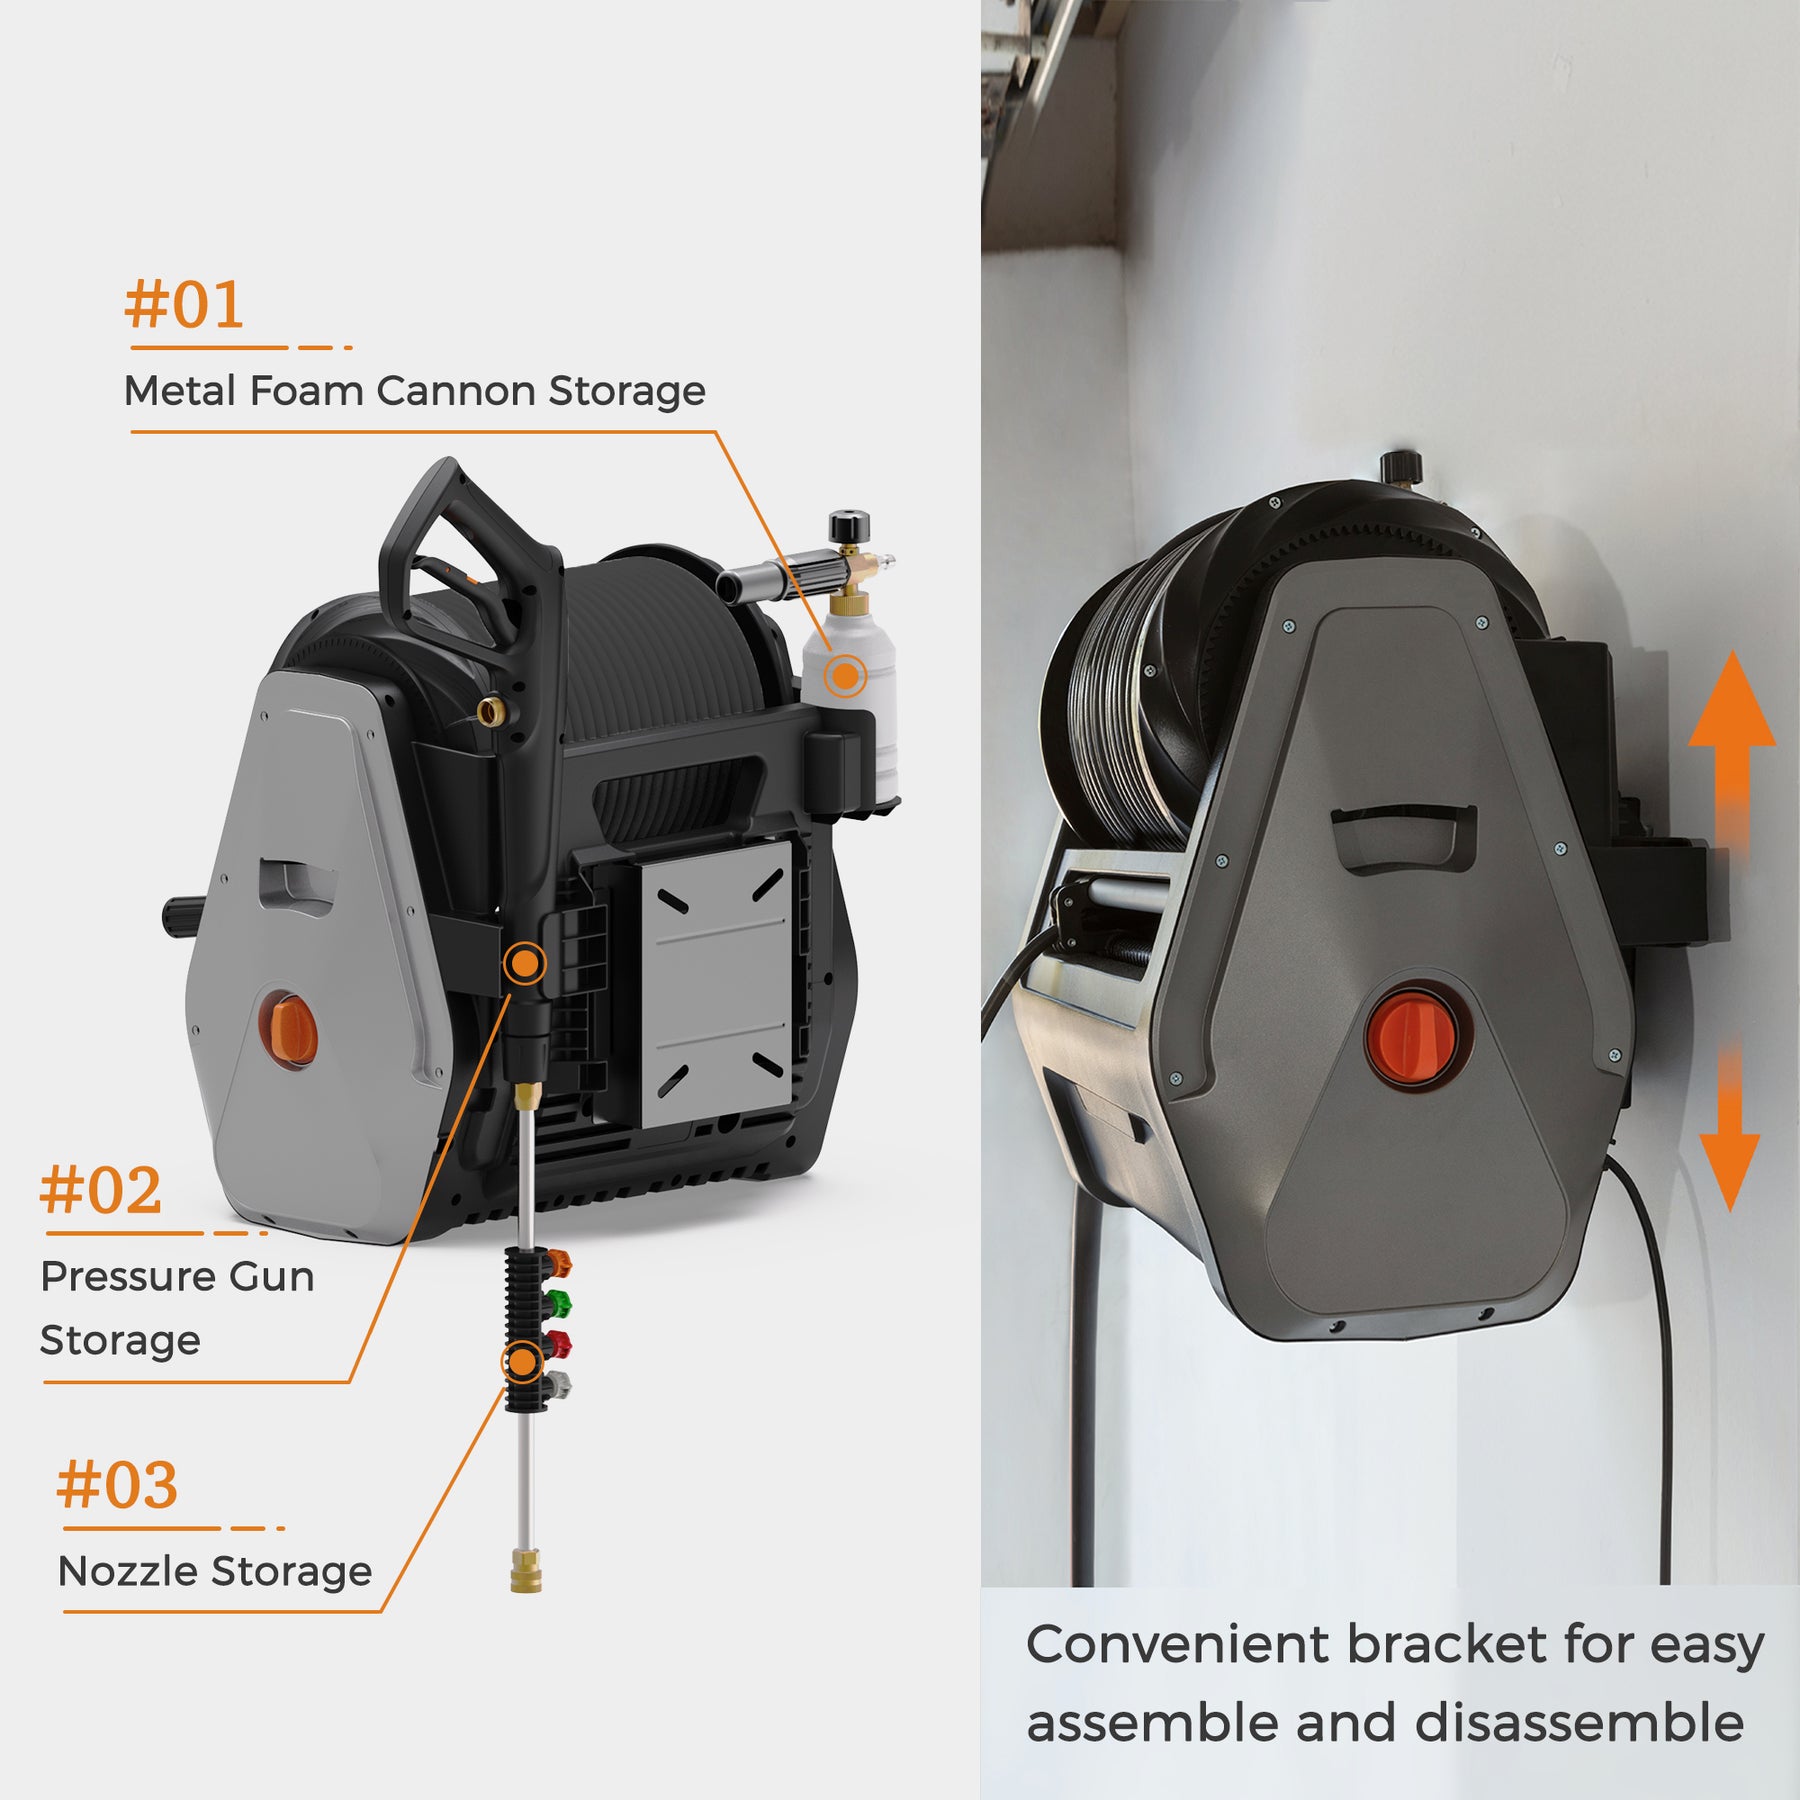 Giraffe Tools Grandfalls Pressure Washer, Wall Mounted Electric Pressure  Washer, Outdoor Power Washer Hangs on Wall, 4 Nozzles and Foam Cannon, Dark